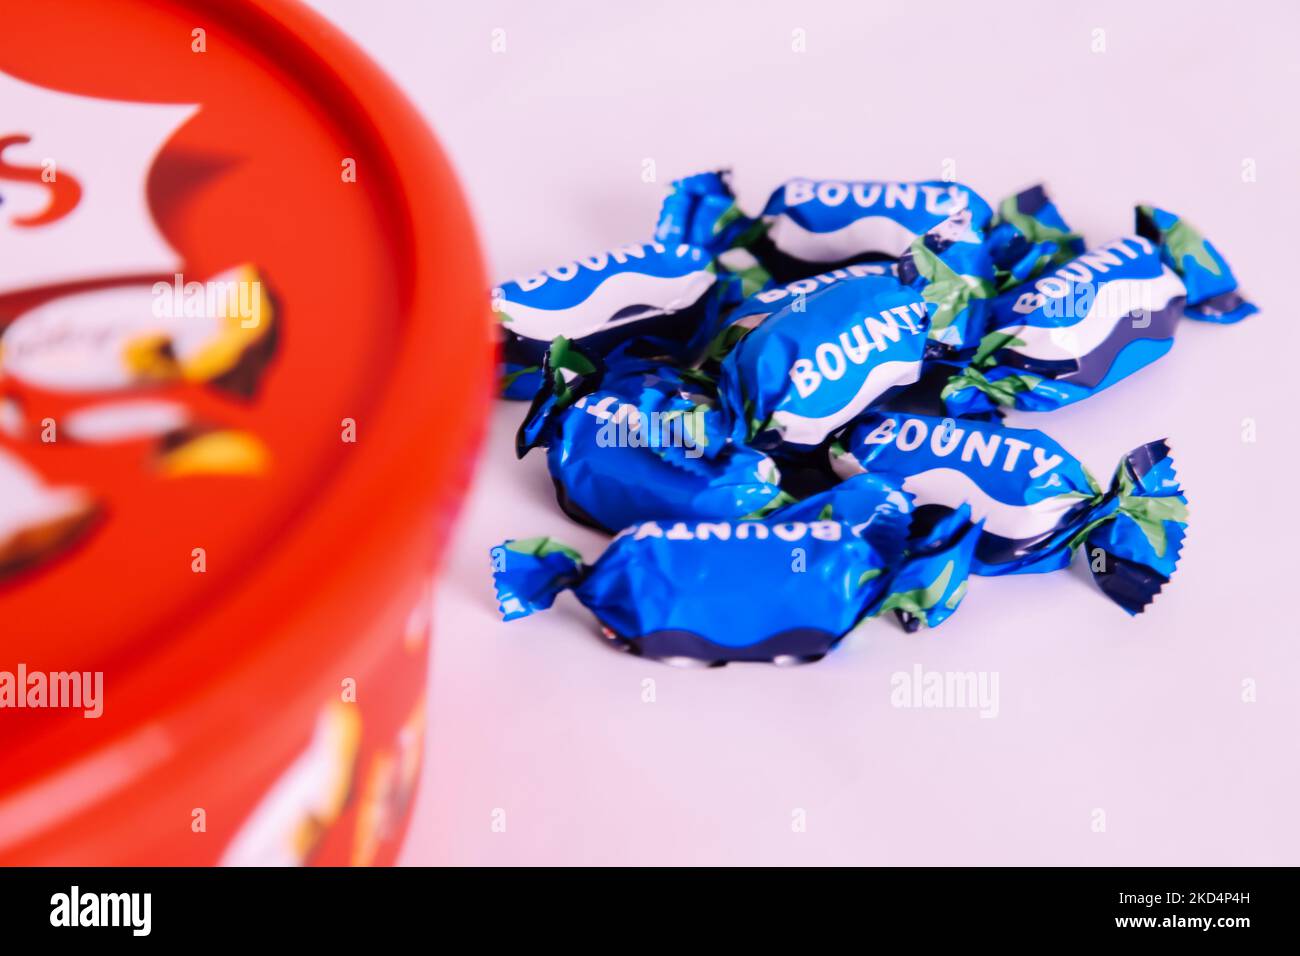 Plastic tub of Celebrations chocolate treat sweets 2022 Christmas edition - Bounty bar sweet left out Stock Photo